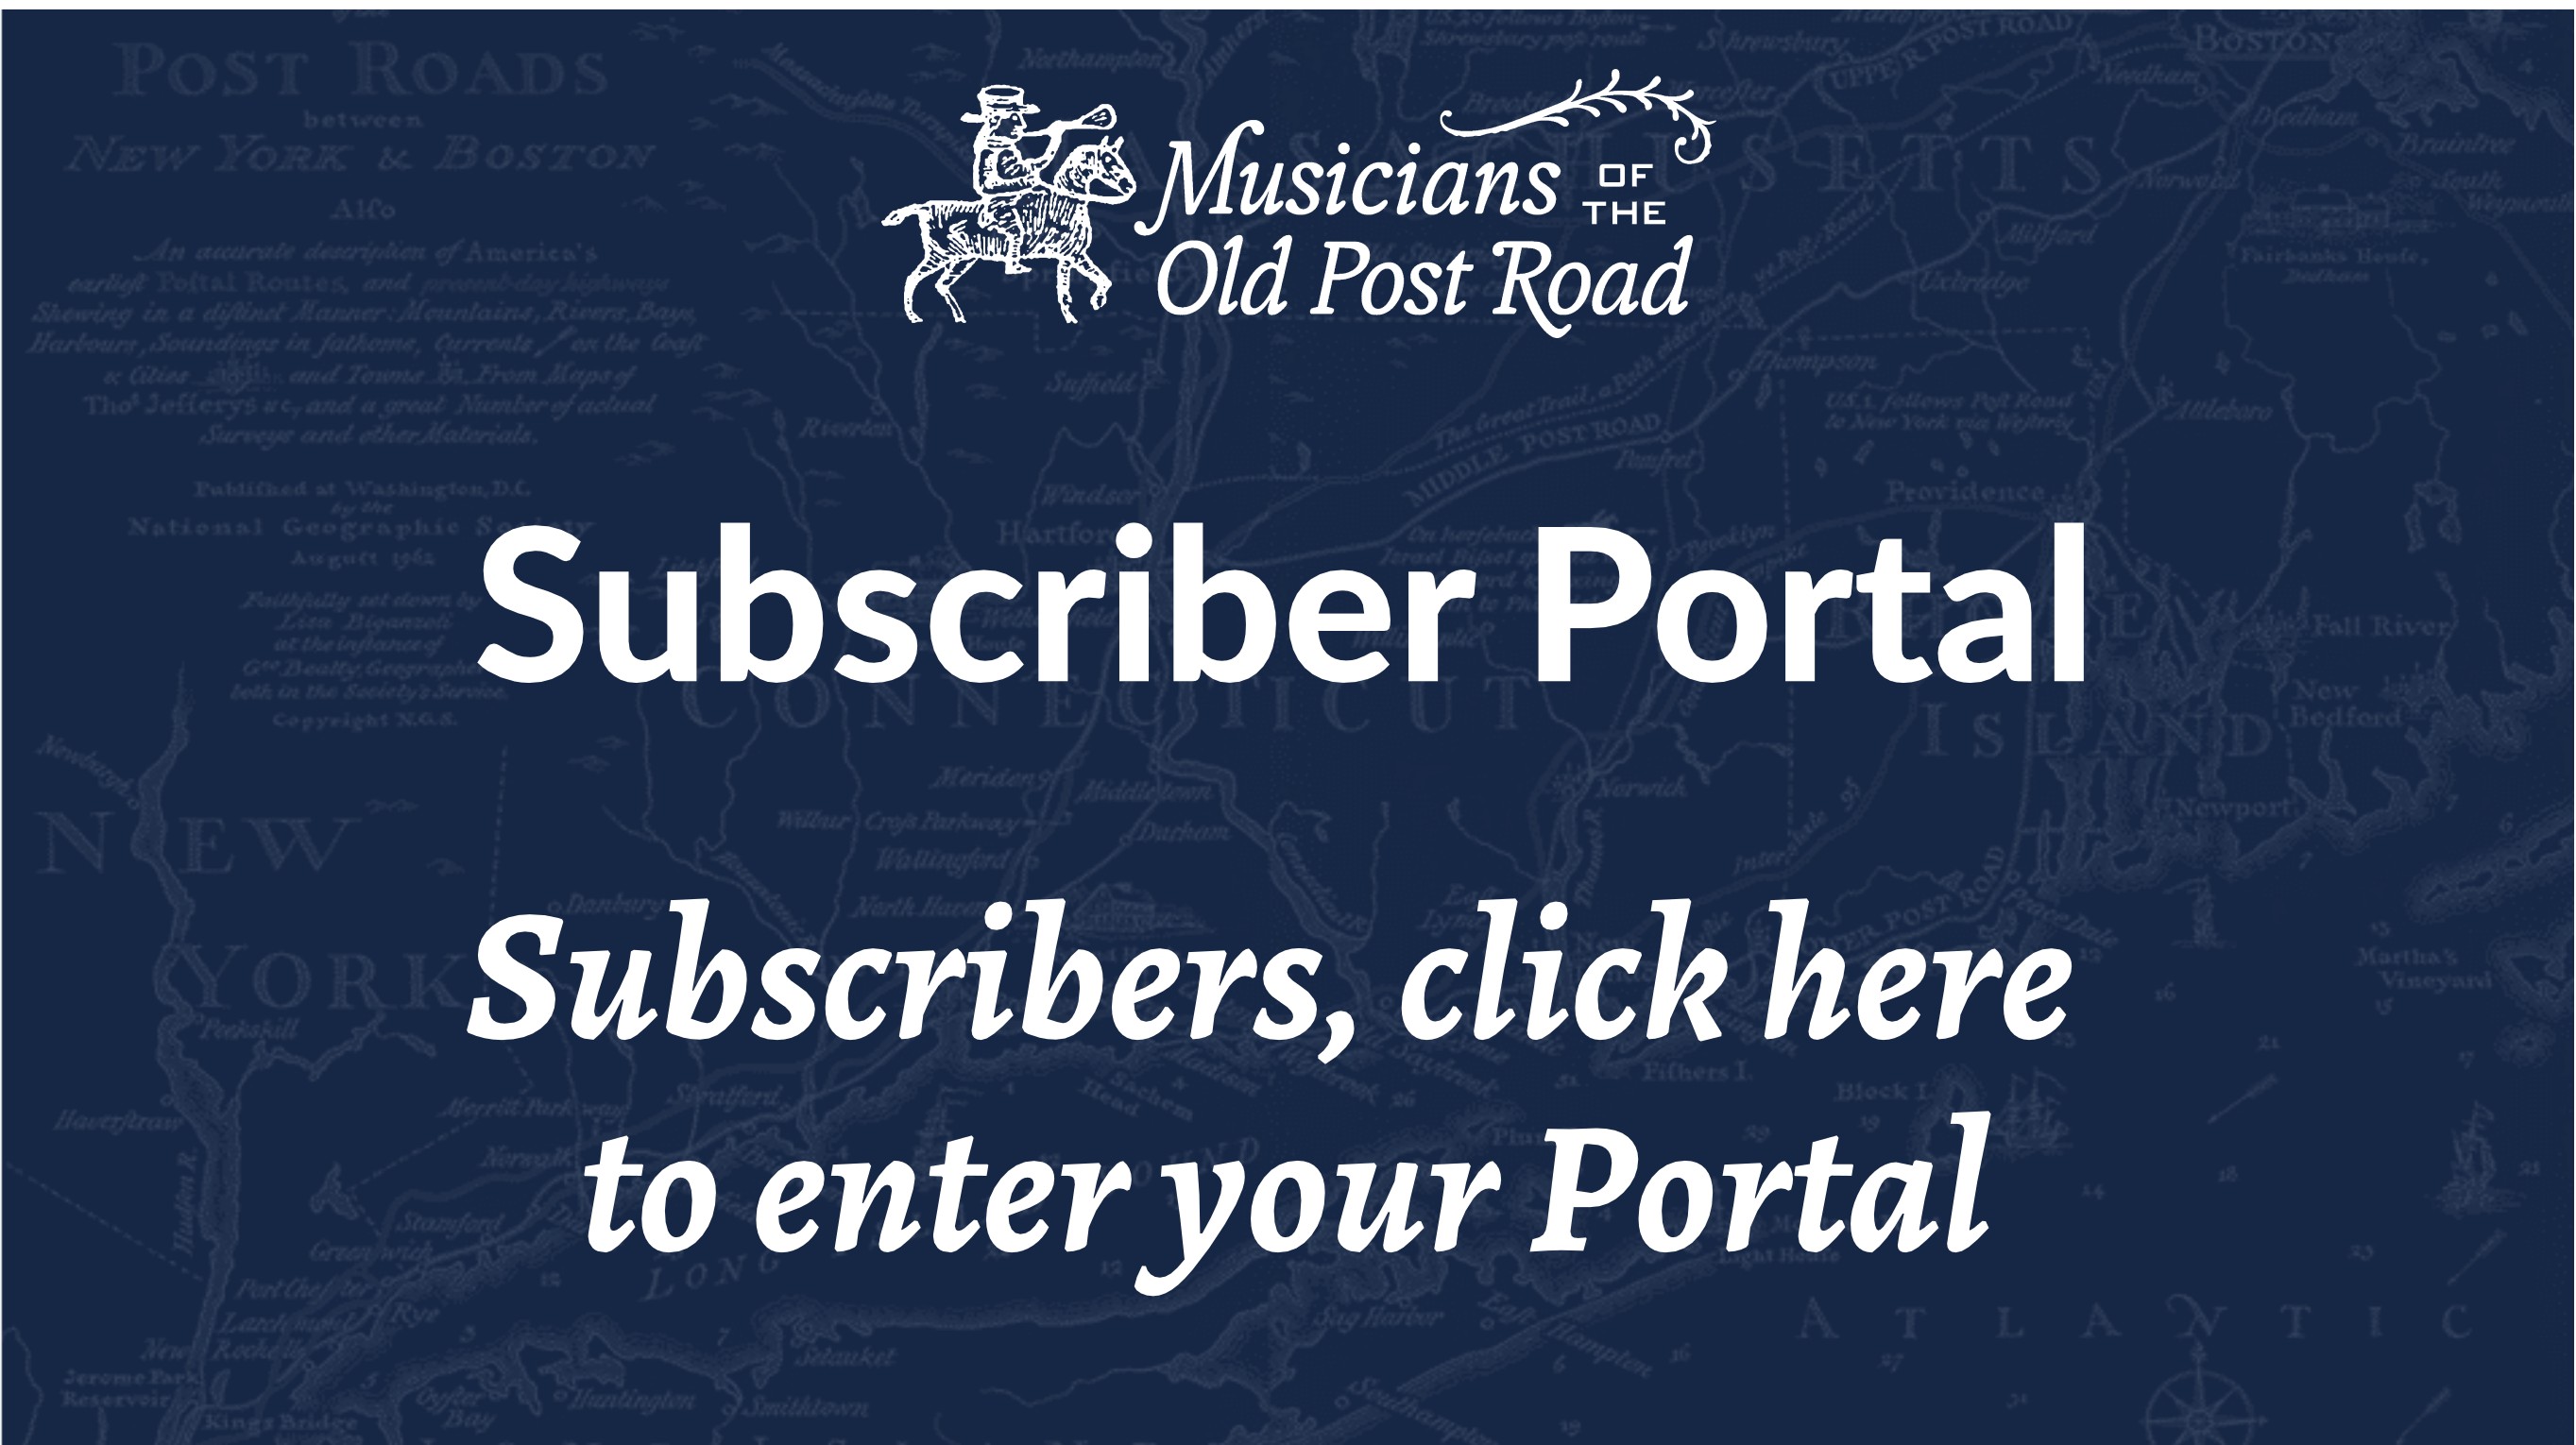 Subscribers, click here to enter your Portal